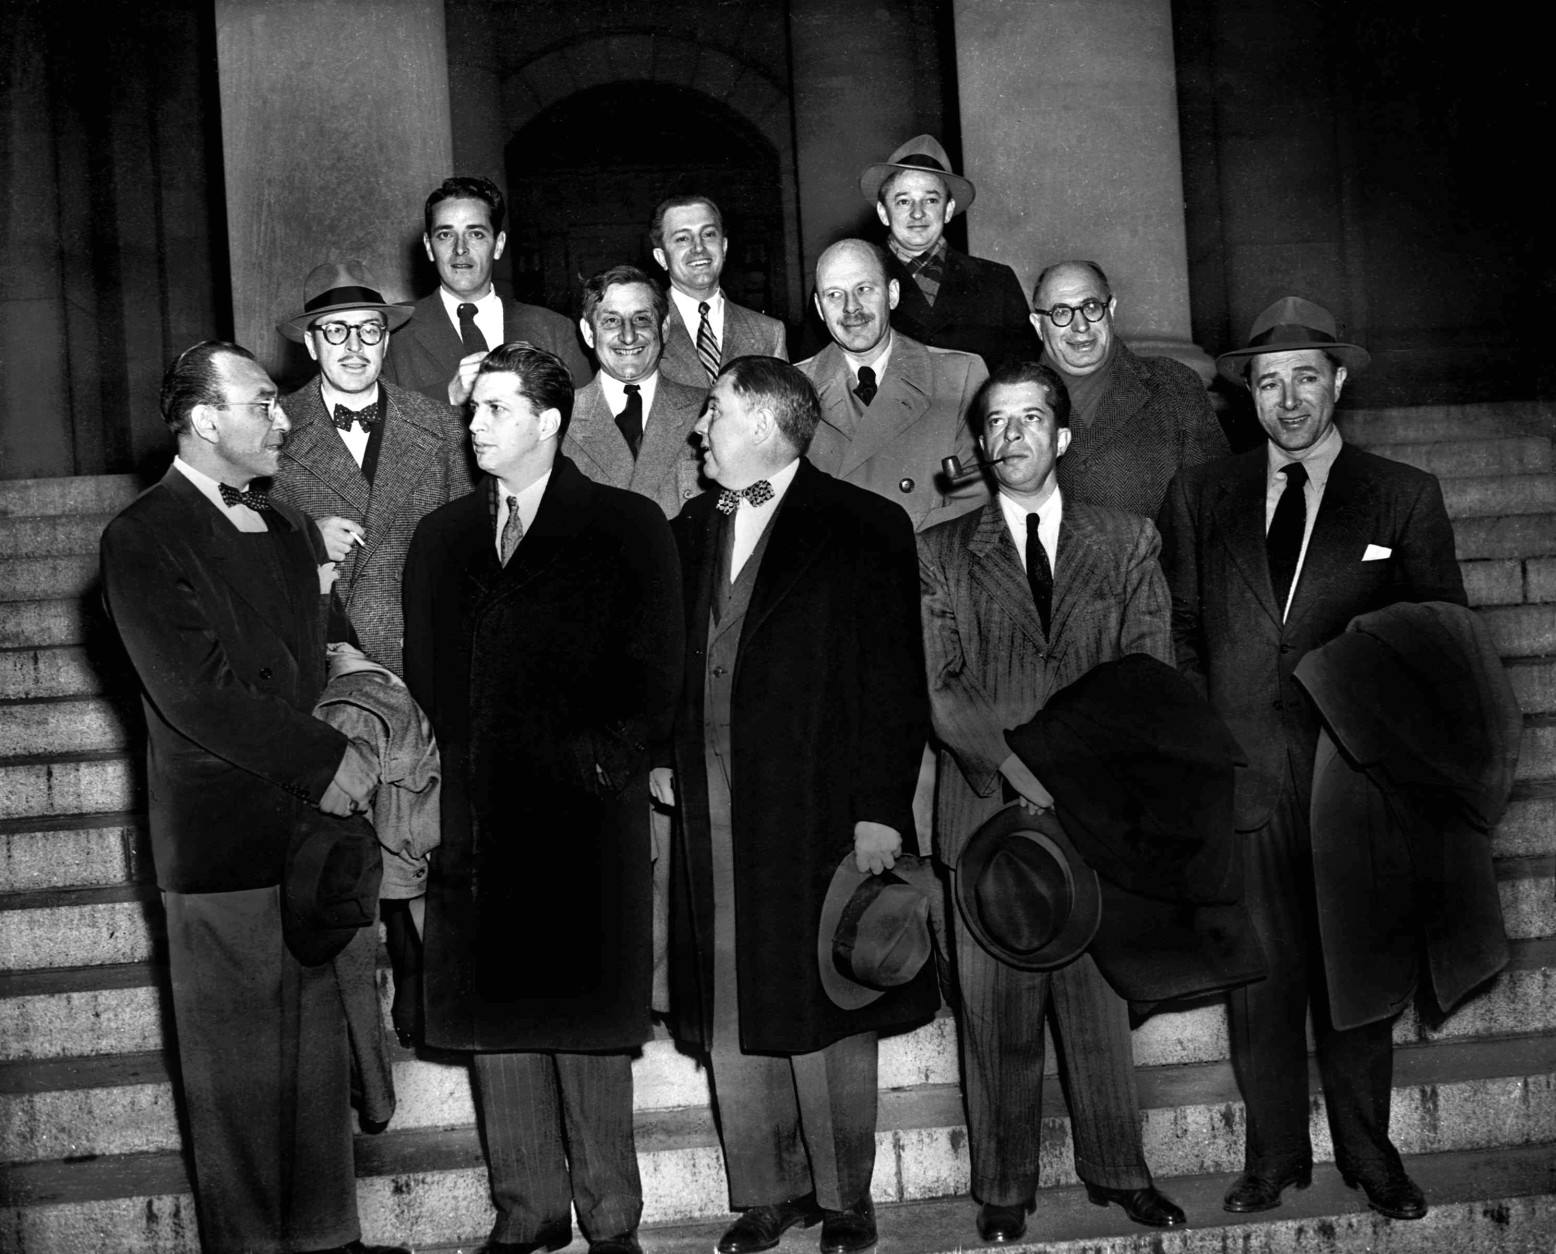 Ten Hollywood personalities, the "Hollywood 10," stand with their attorneys outside district court in Washington, D.C., Jan. 9, 1948 before arraignment on contempt of Congress charges.  From left, front: Herbert Biberman, Attorney Martin Popper, Attorney Robert W. Kenny, Albert Maltz and Lester Cole.  Second row, from left: Dalton Trumbo, John Howard Lawson, Alvah Bessie and Samuel Ornitz.  Top row, from left: Ring Lardner Jr., Edward Dmytryk and Adrian Scott. The ten were charged for refusing to cooperate with the House Un-American Activities Committee. (AP Photo)